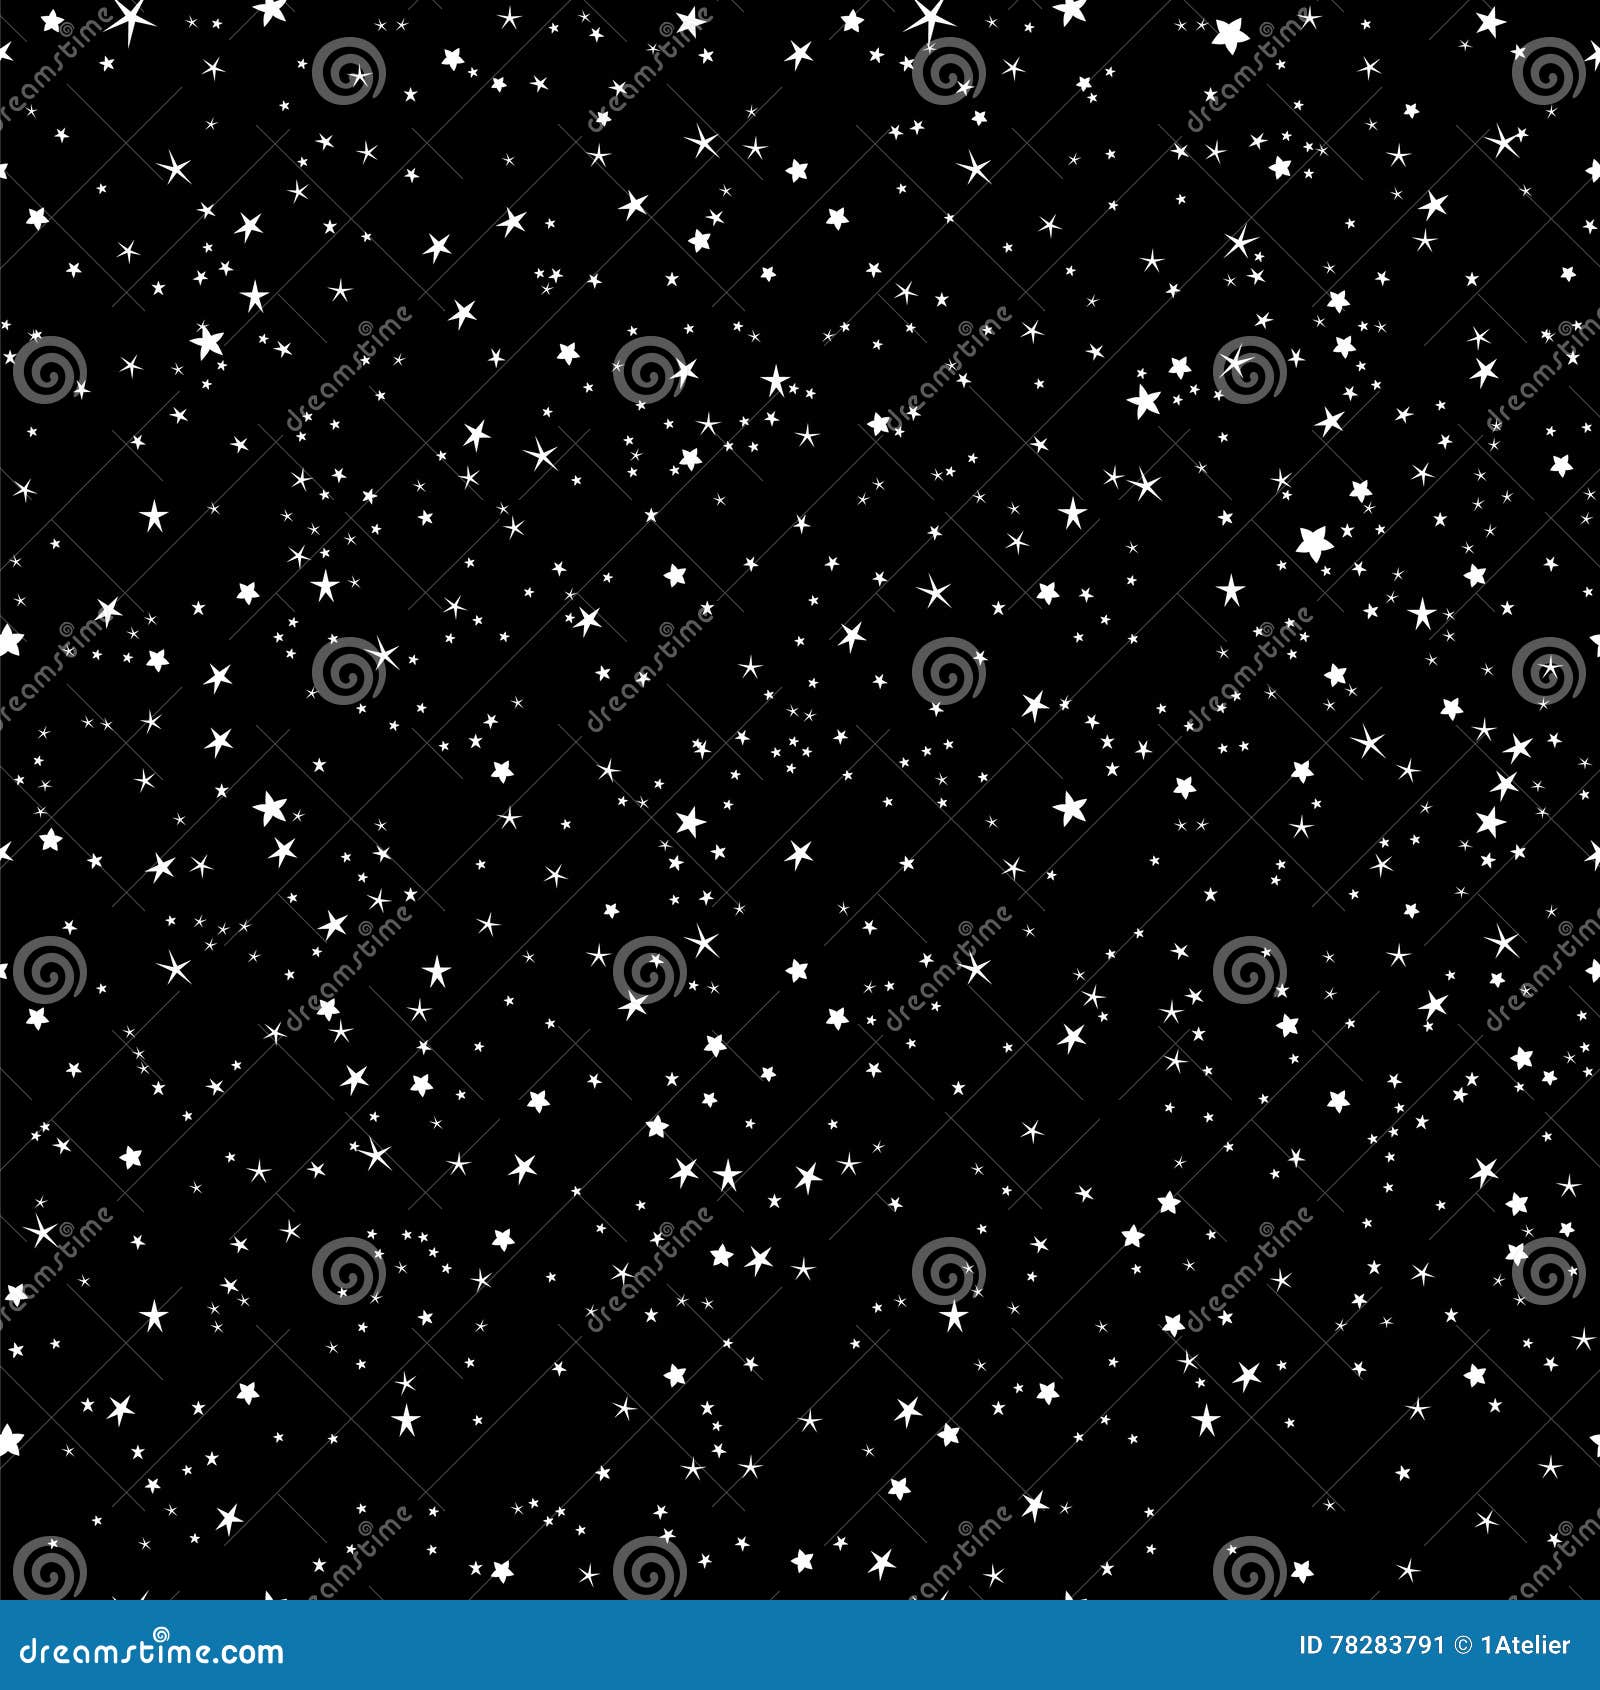 Space Background Night Sky And Stars Black And White Seamless